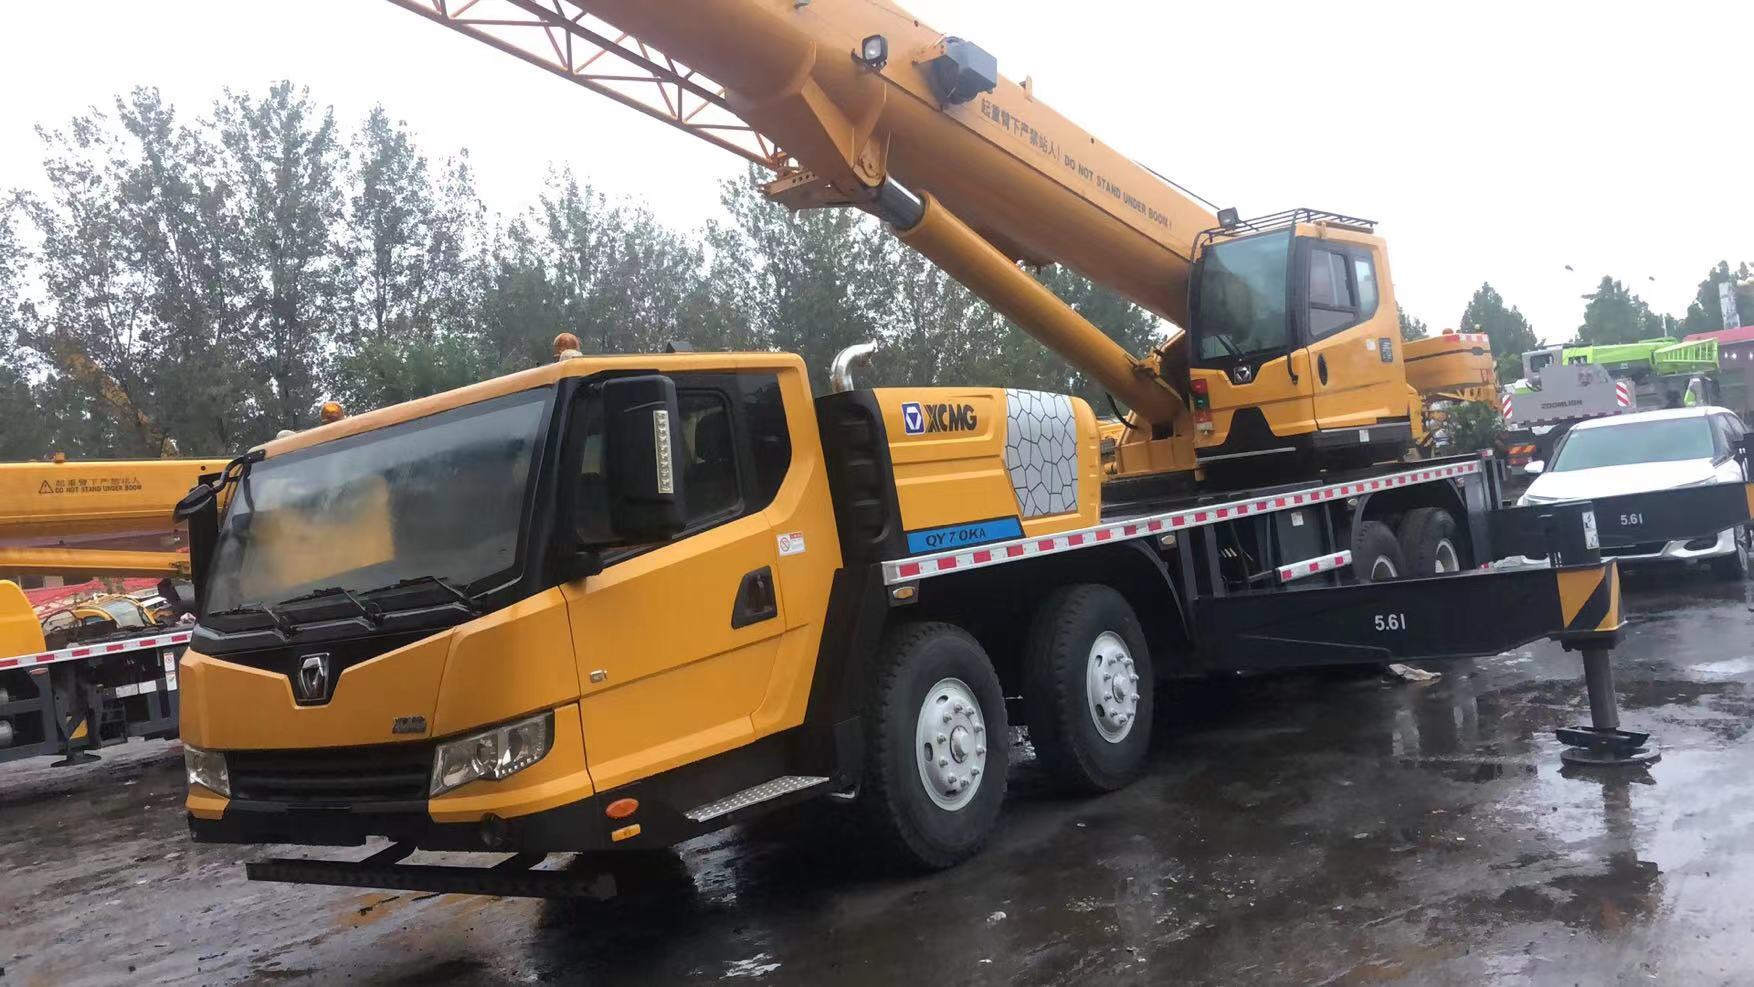 used truck cranes XCMG QY70K With 70 tons lifting capacity For lifting various large-scale projects 10